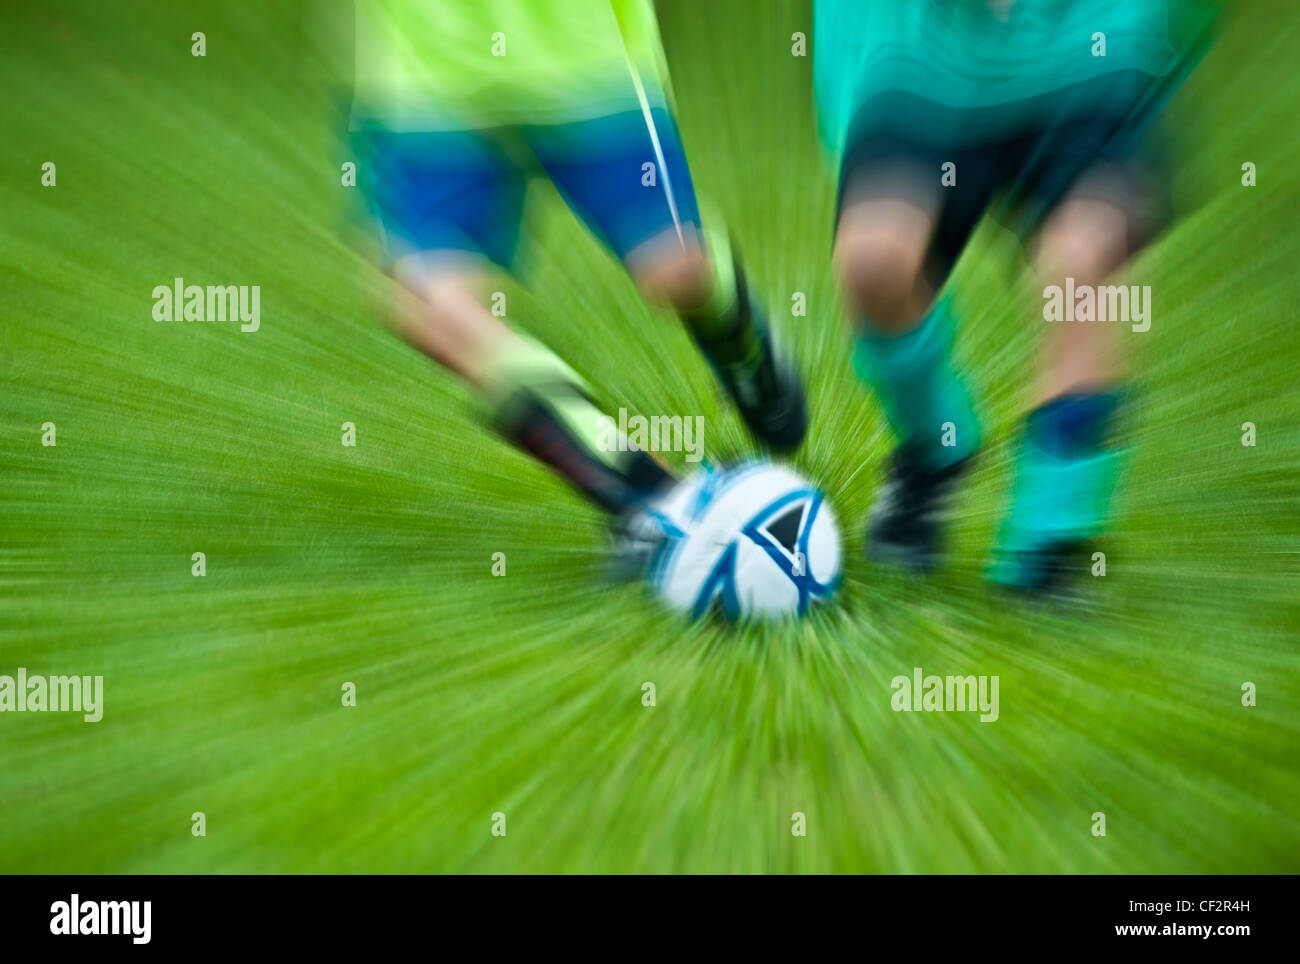 Boys youth soccer game. Stock Photo